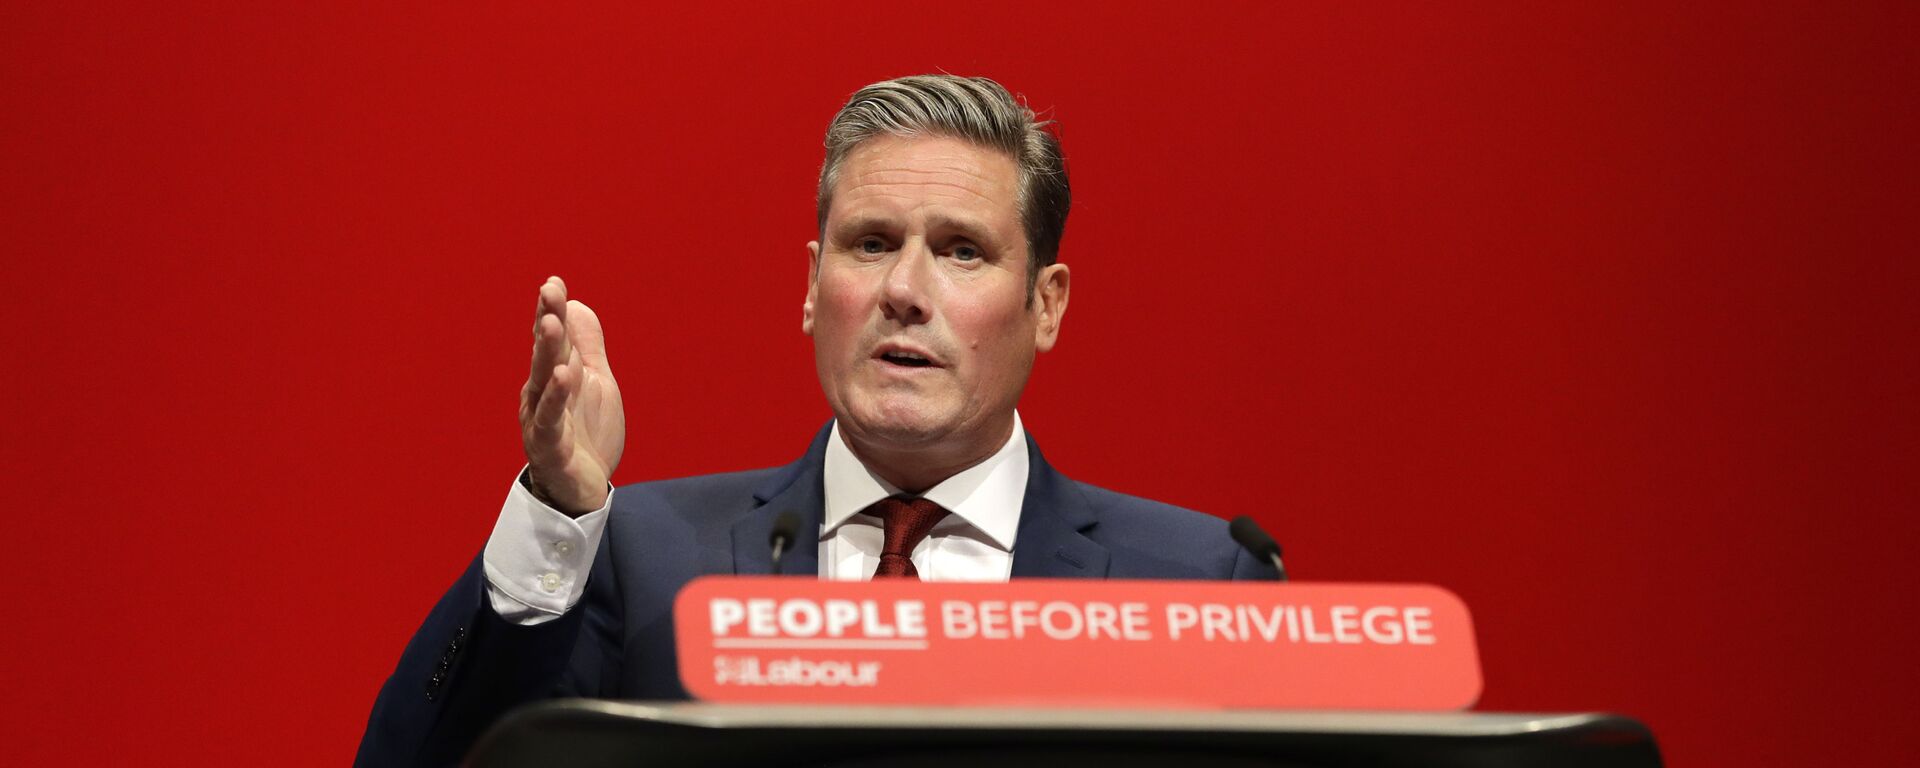 FILE - In this Monday, Sept. 23, 2019 file photo, Britain's Shadow Brexit Secretary Keir Starmer speaks on stage during the Labour Party Conference at the Brighton Centre in Brighton, England - Sputnik International, 1920, 18.02.2021